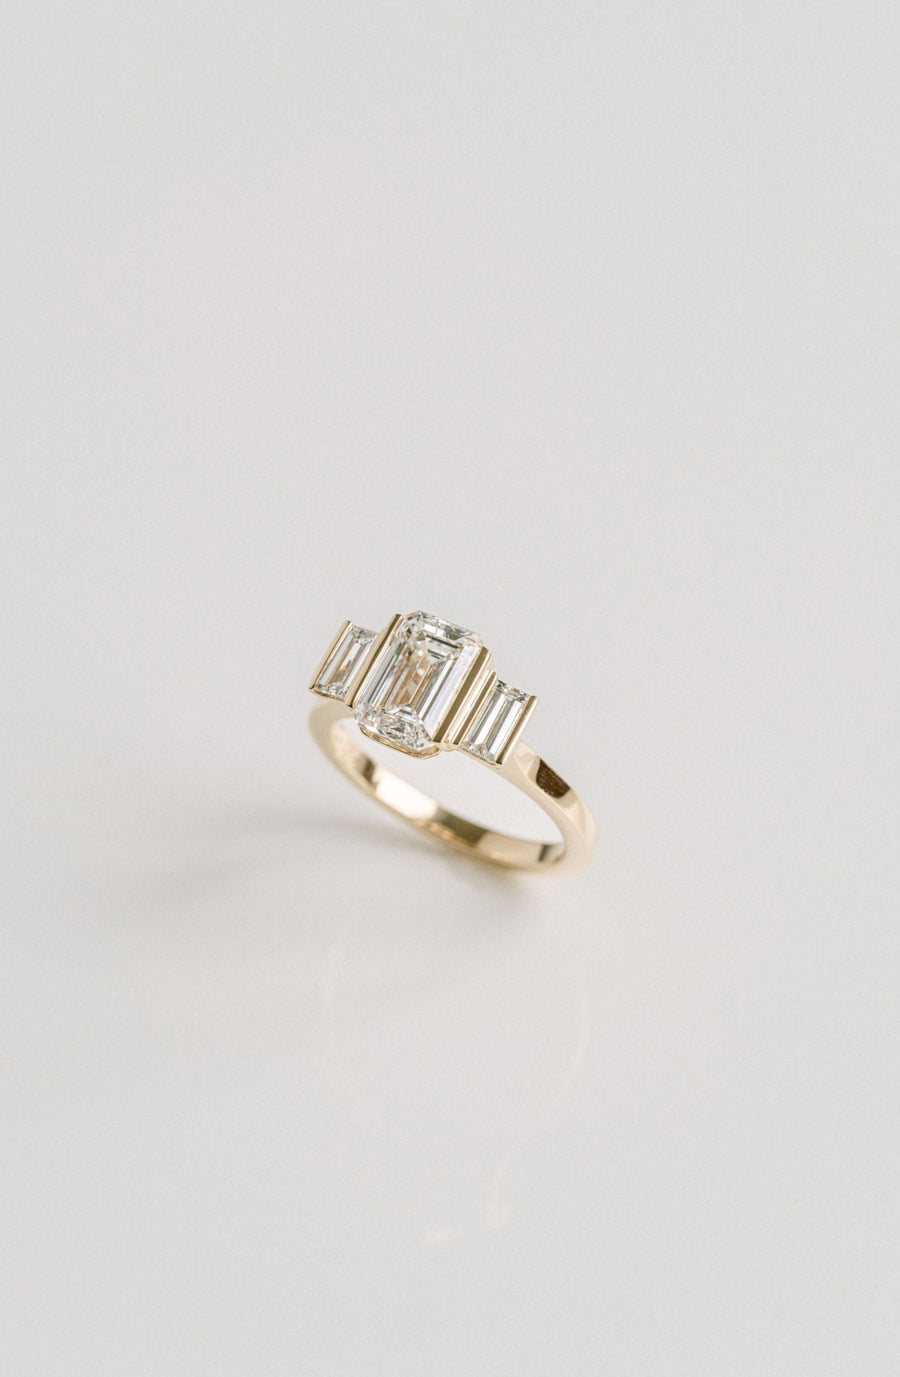 Emerald Cut Diamond Engagement Ring With Emerald Cut Accents Bar Set, 14k Yellow Gold